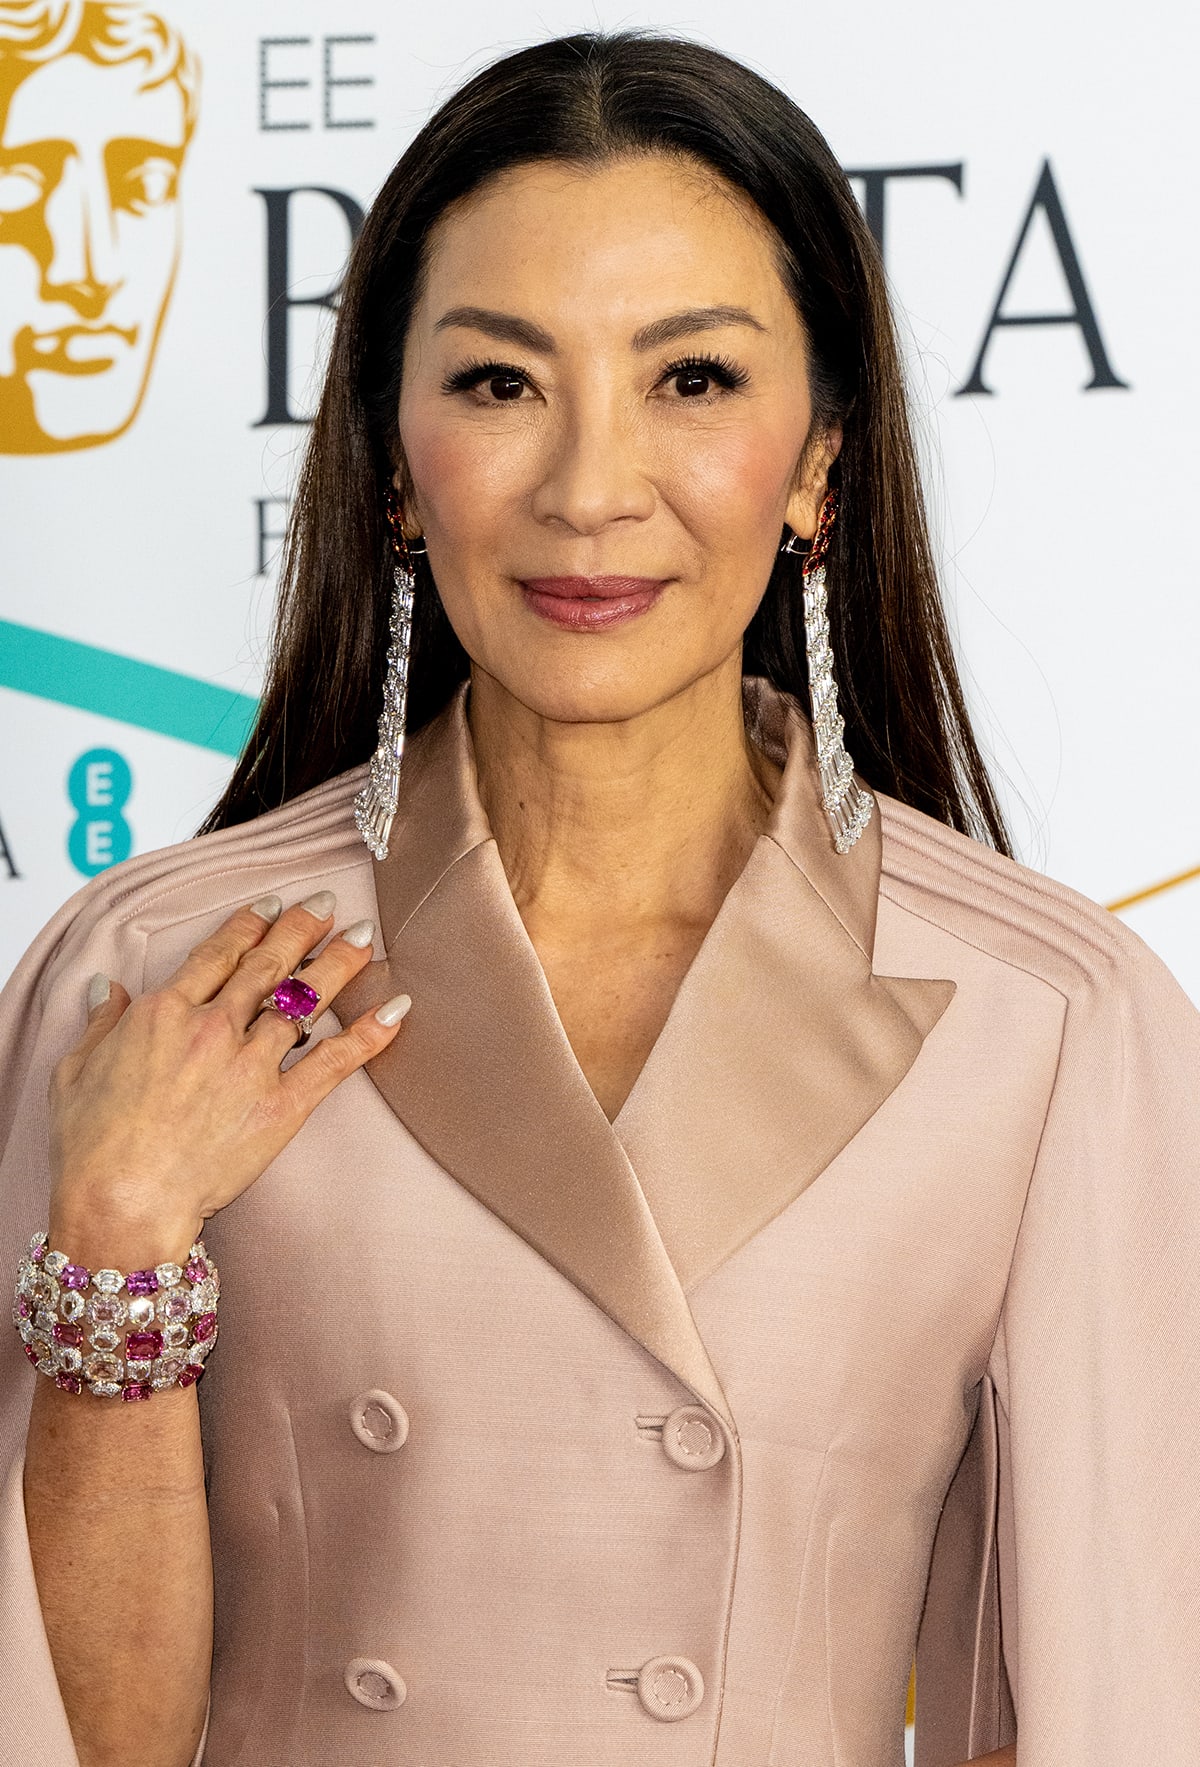 Michelle Yeoh keeps things classy with Moussaieff jewelry, straightened locks, and a radiant makeup